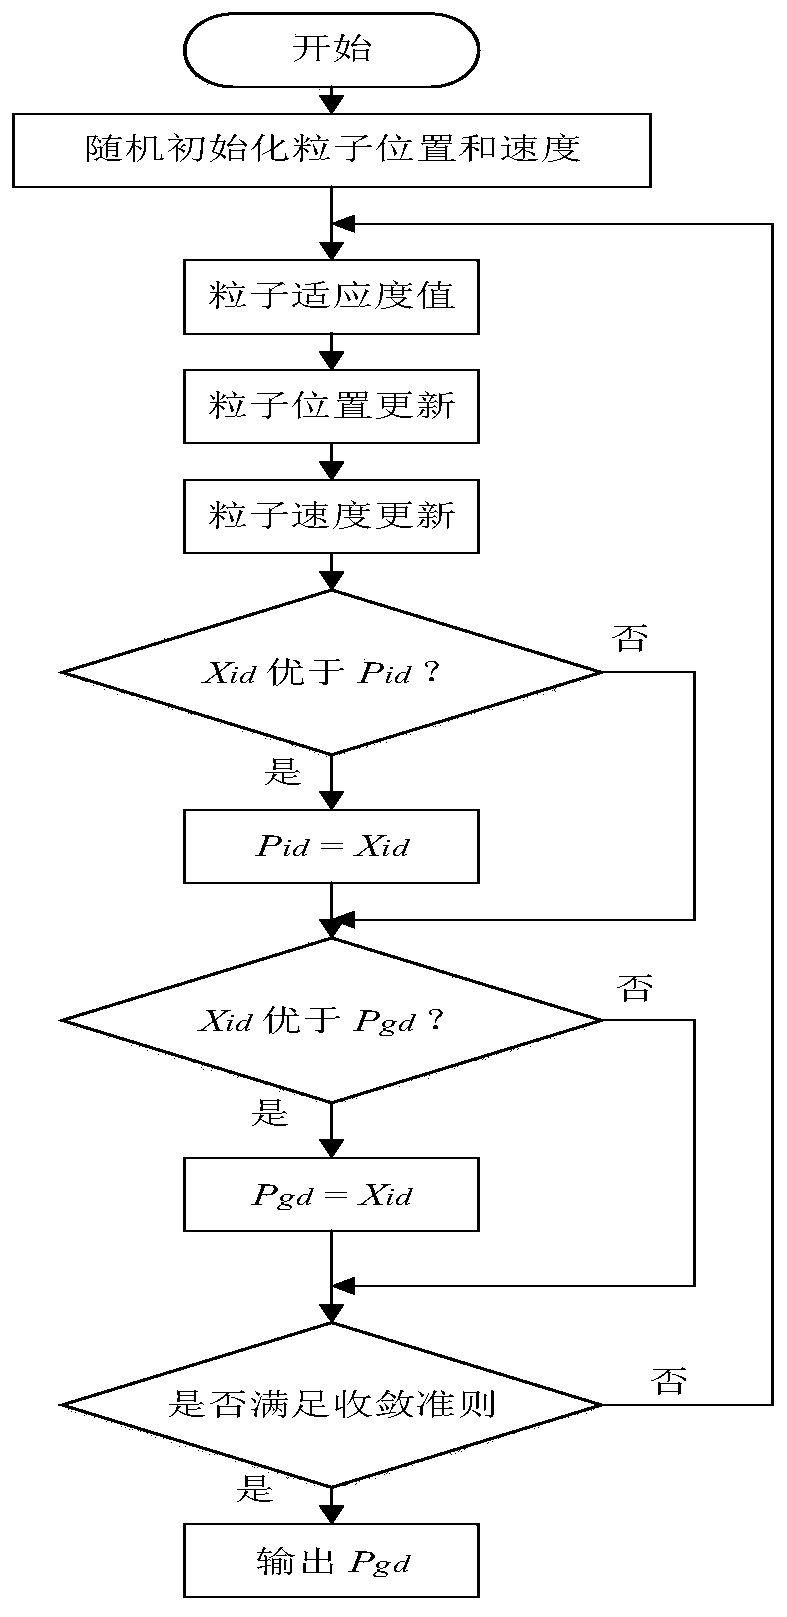 Network control system time delay compensation method based on predictive control